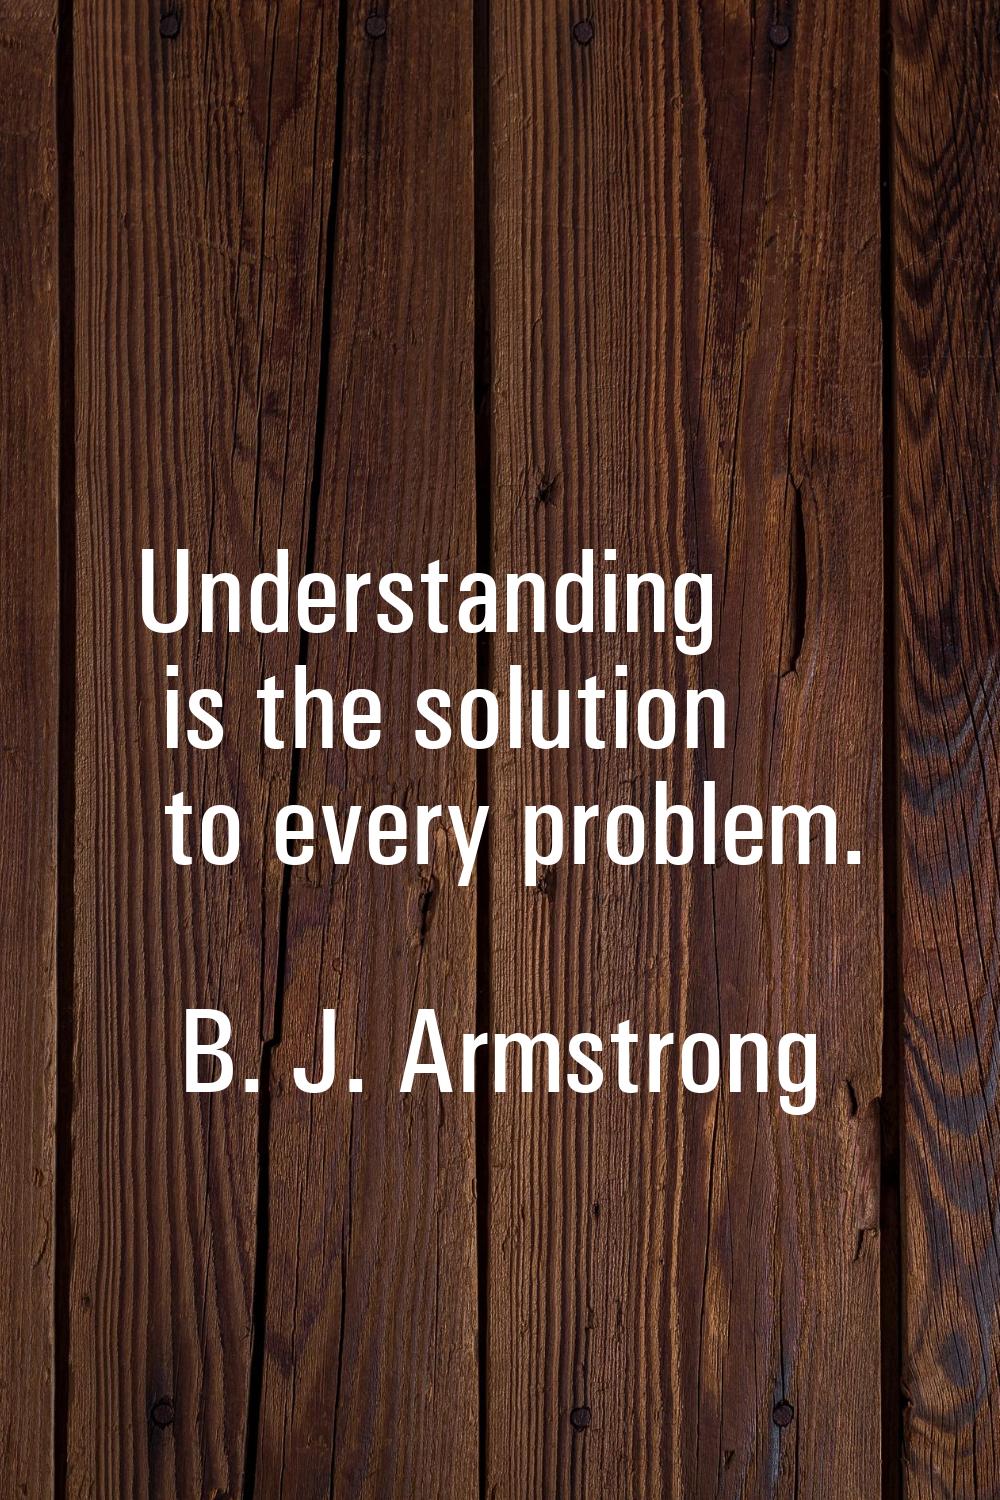 Understanding is the solution to every problem.